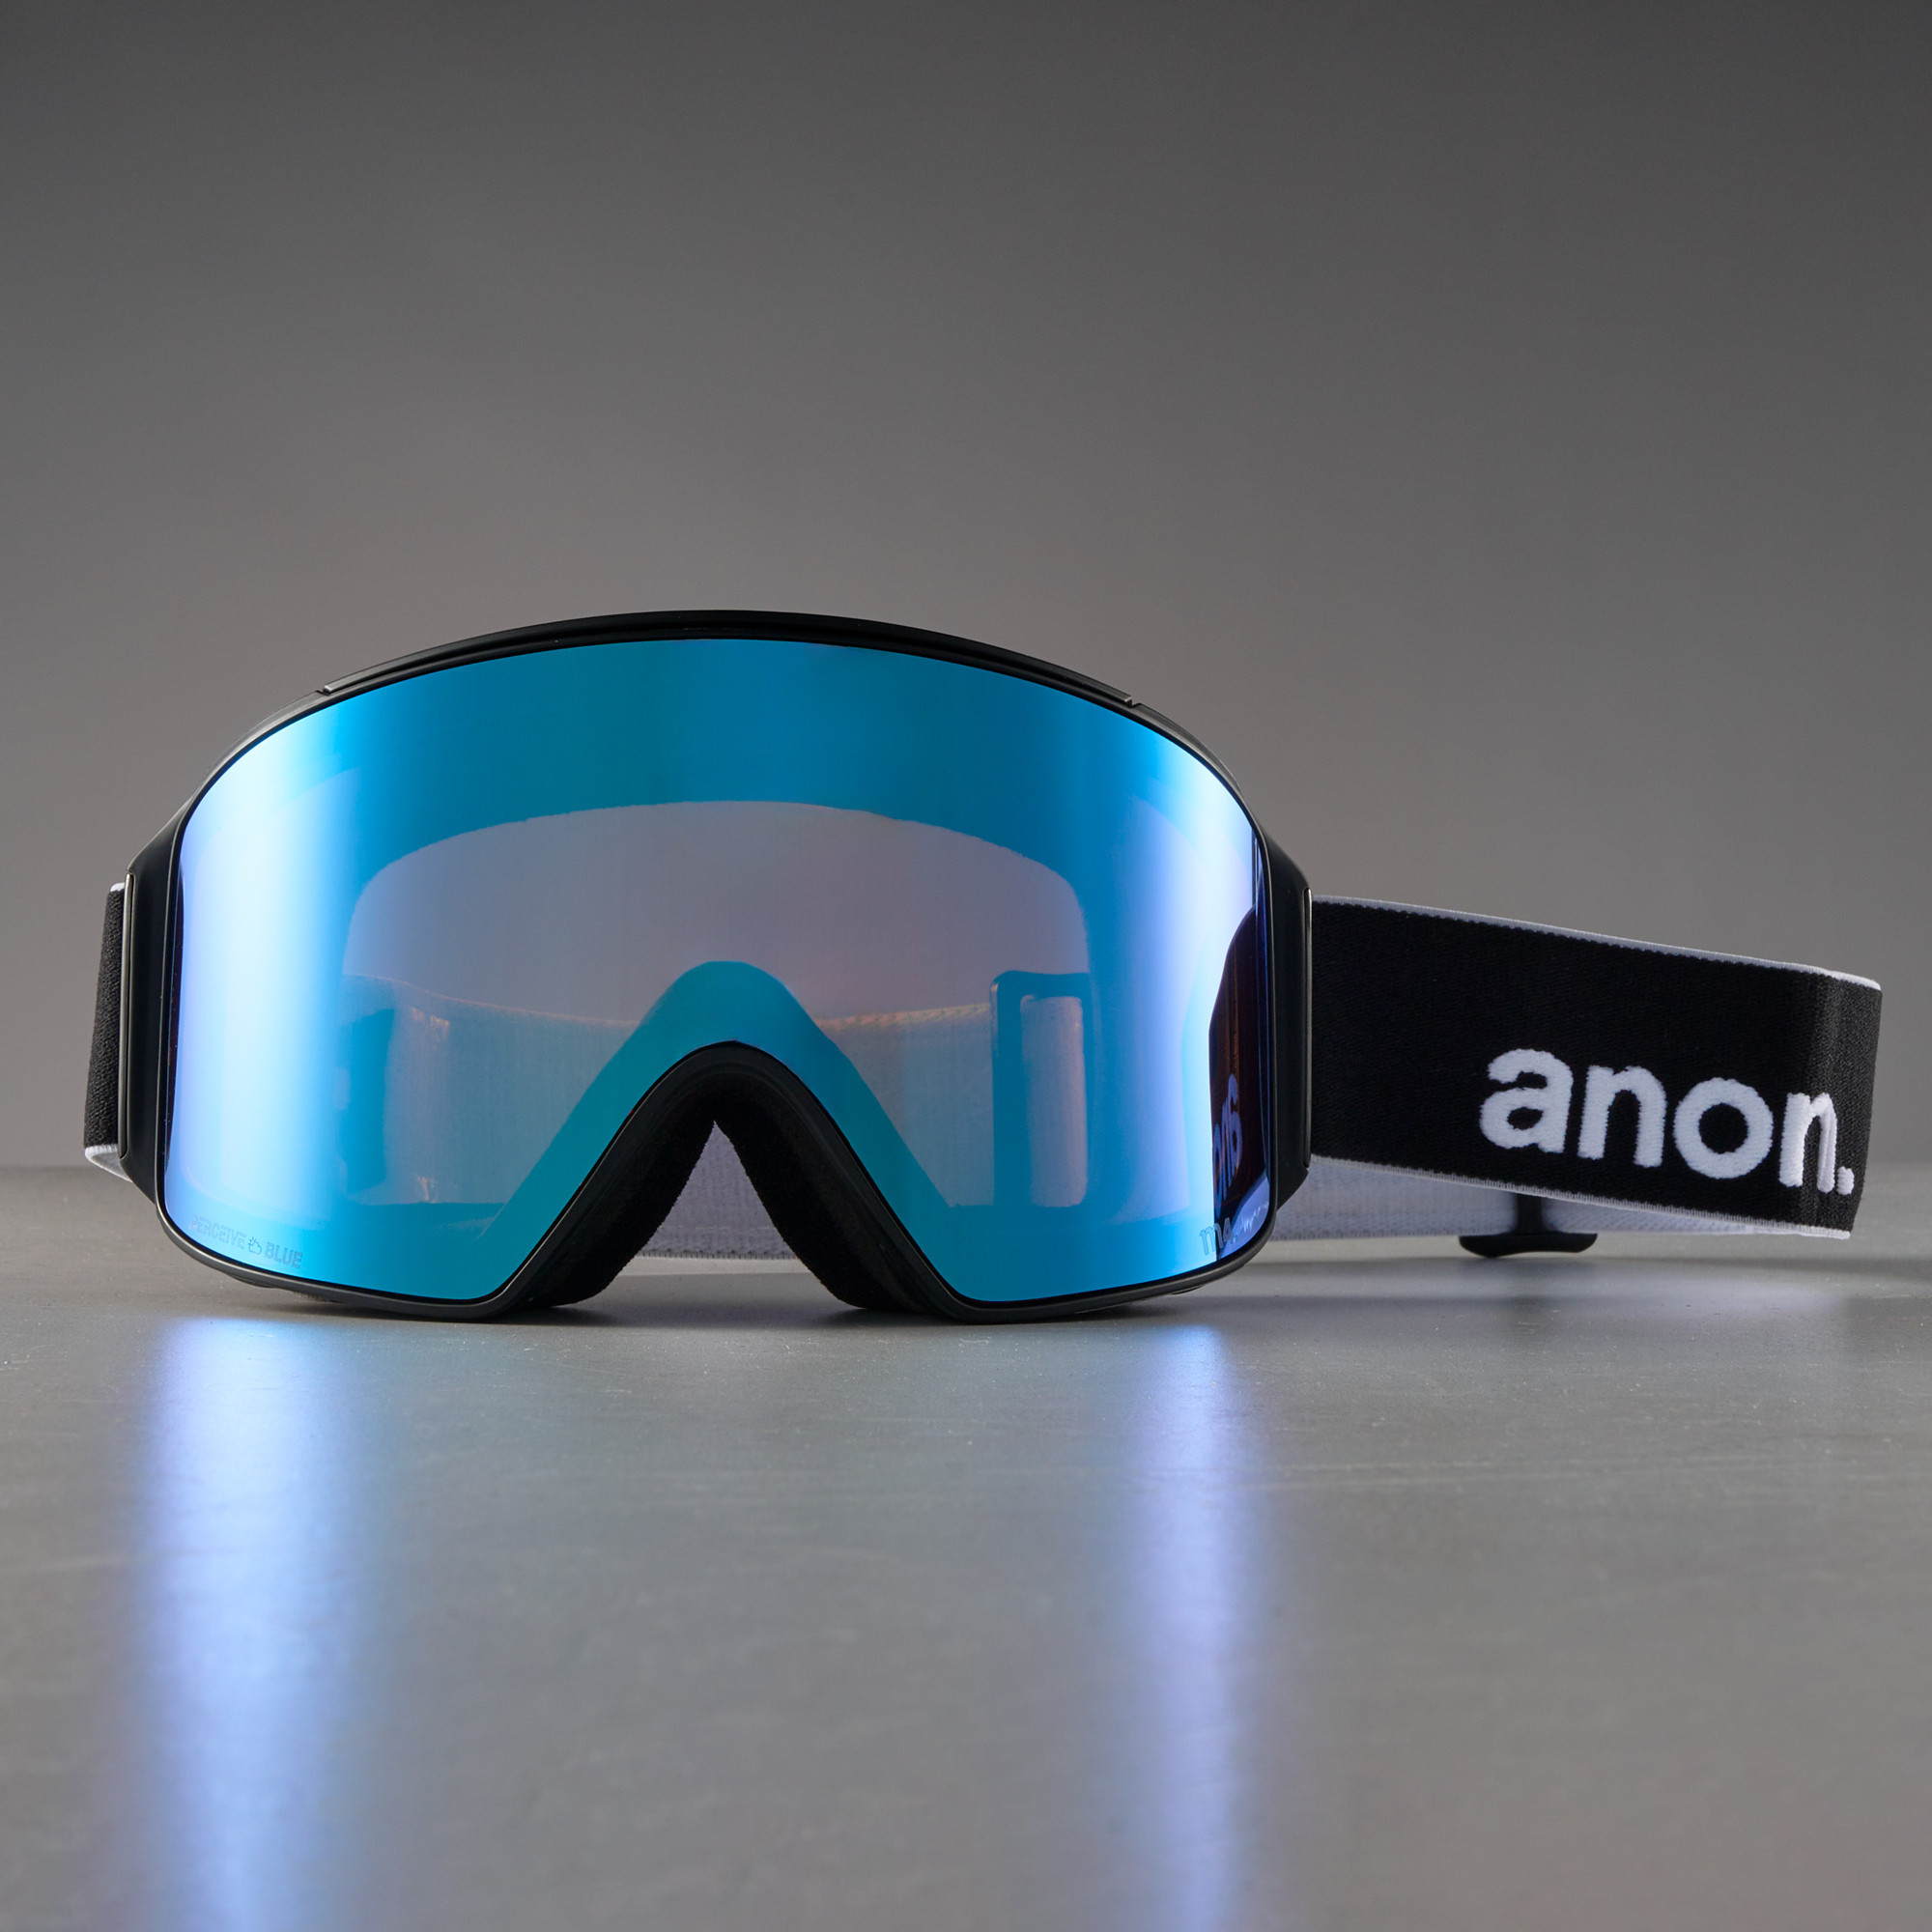 Anon M4 Cylindrical Low Bridge Fit Goggles | The Ski Monster